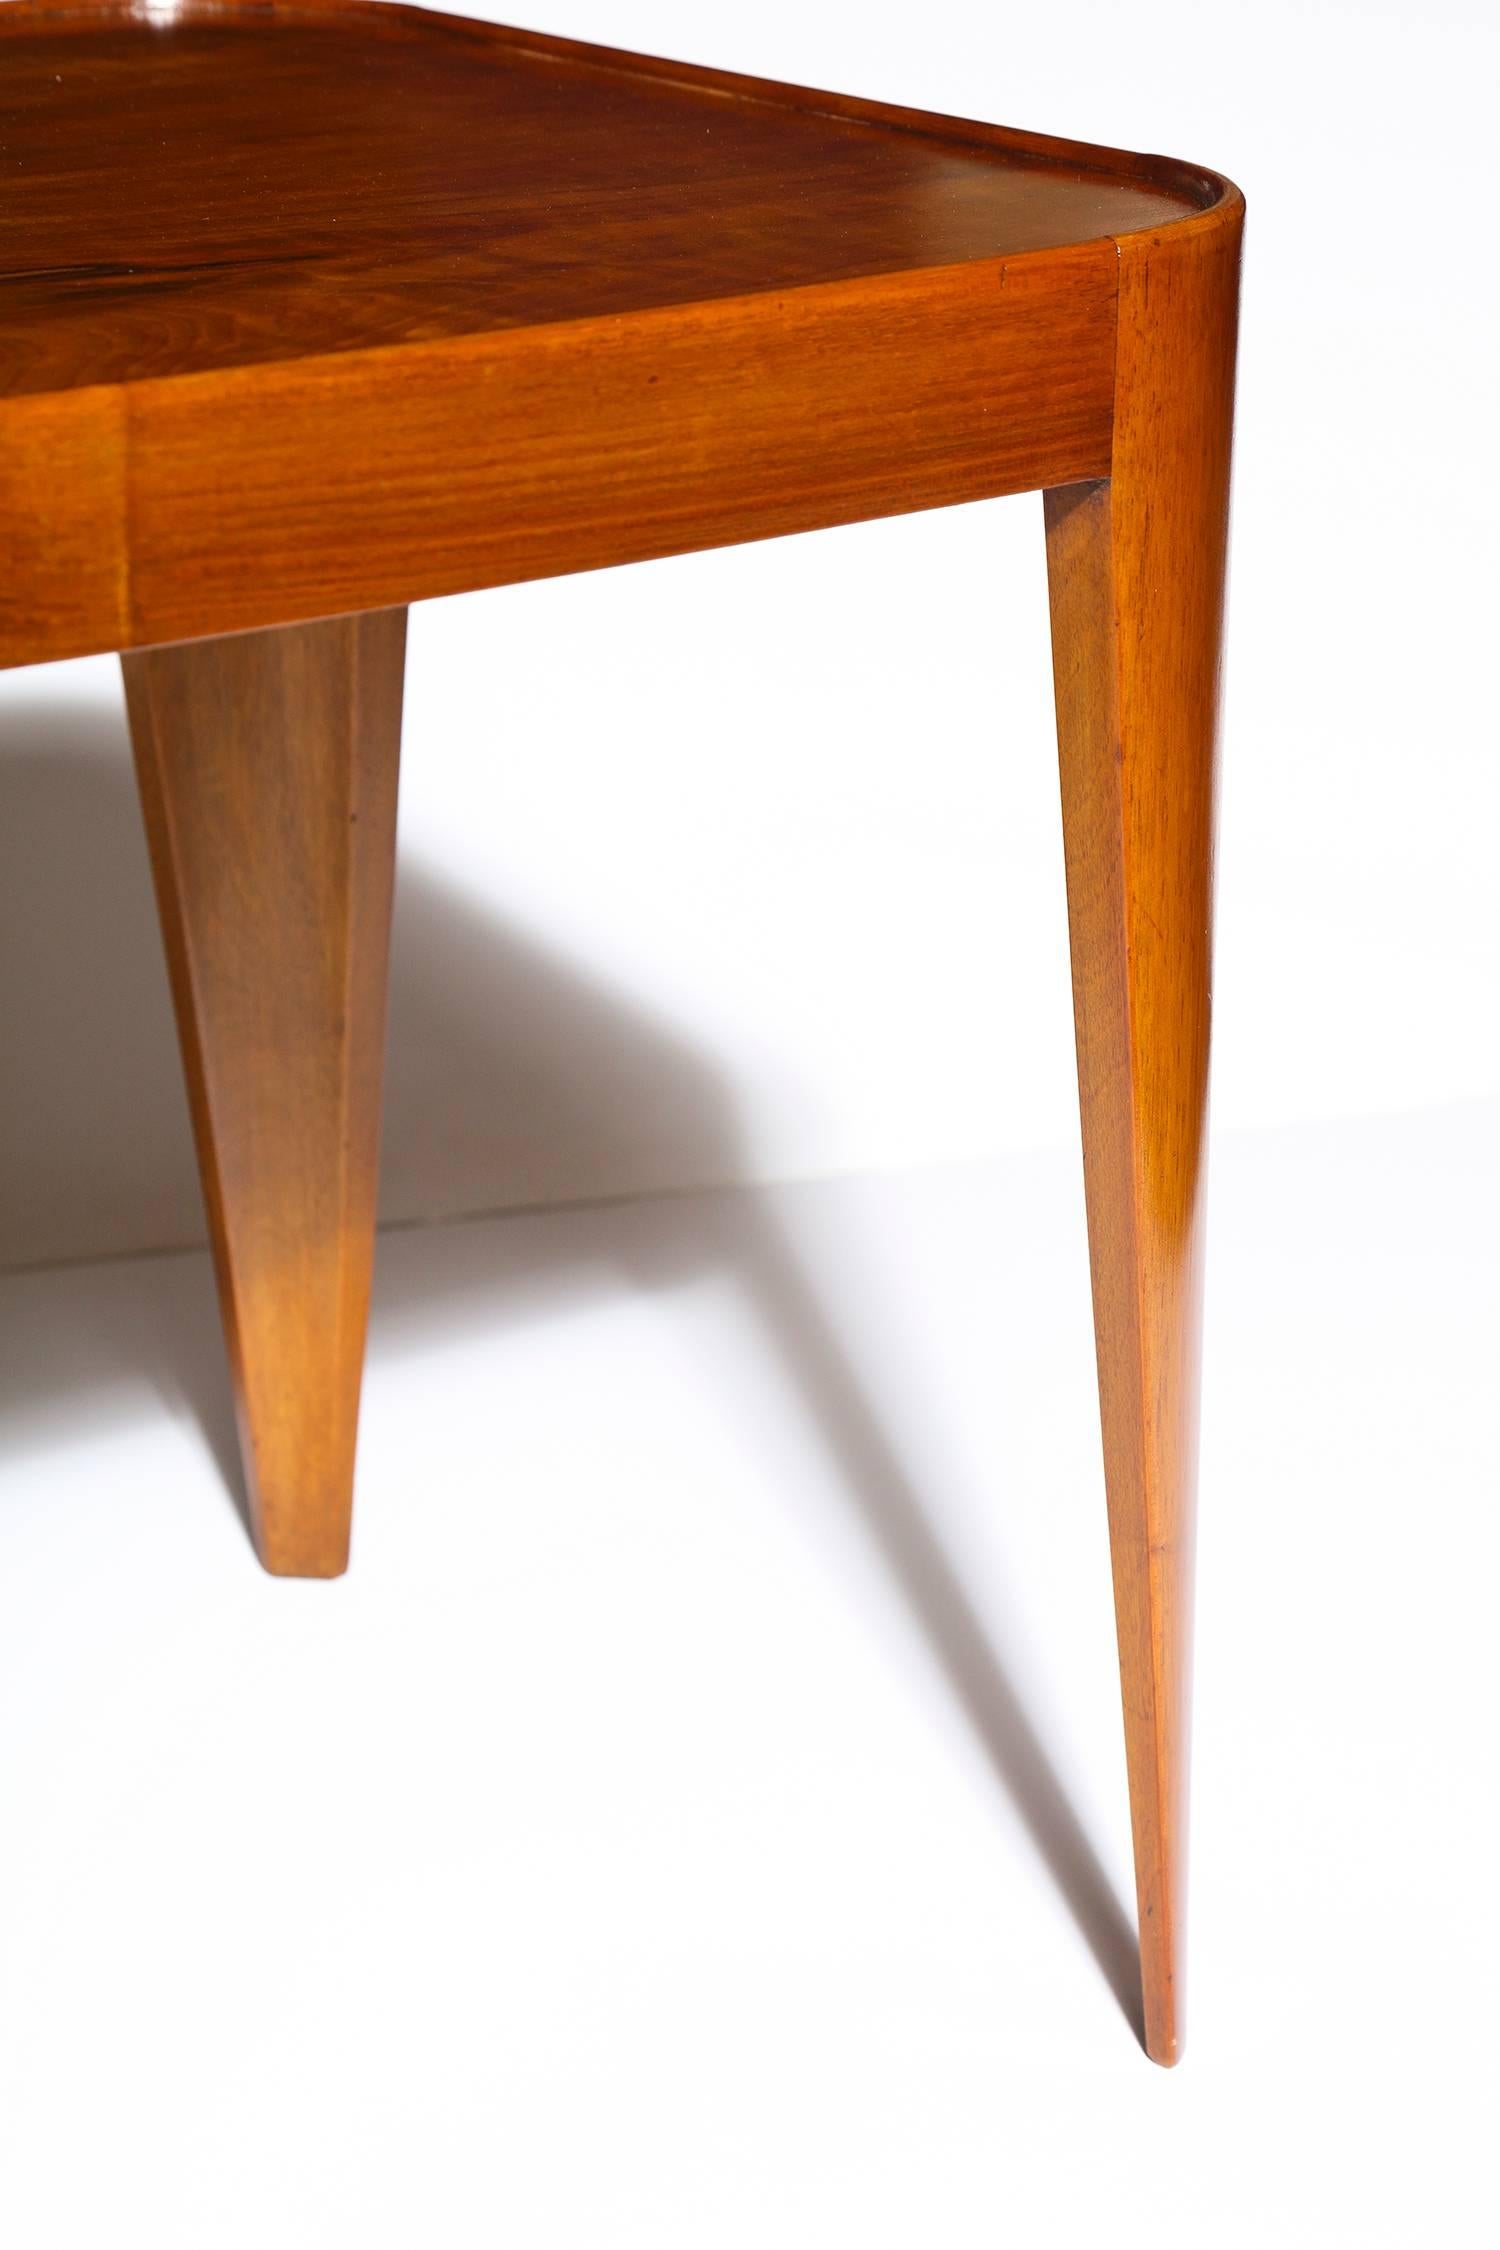 Gio Ponti low table for Casa & Giardino, rectangular table with four tapered and curved legs. Mahogany with crotch burl top and gallery edge. Recently restored, this table comes with a “Certificate of Authenticity” from the Gio Ponti Archives.